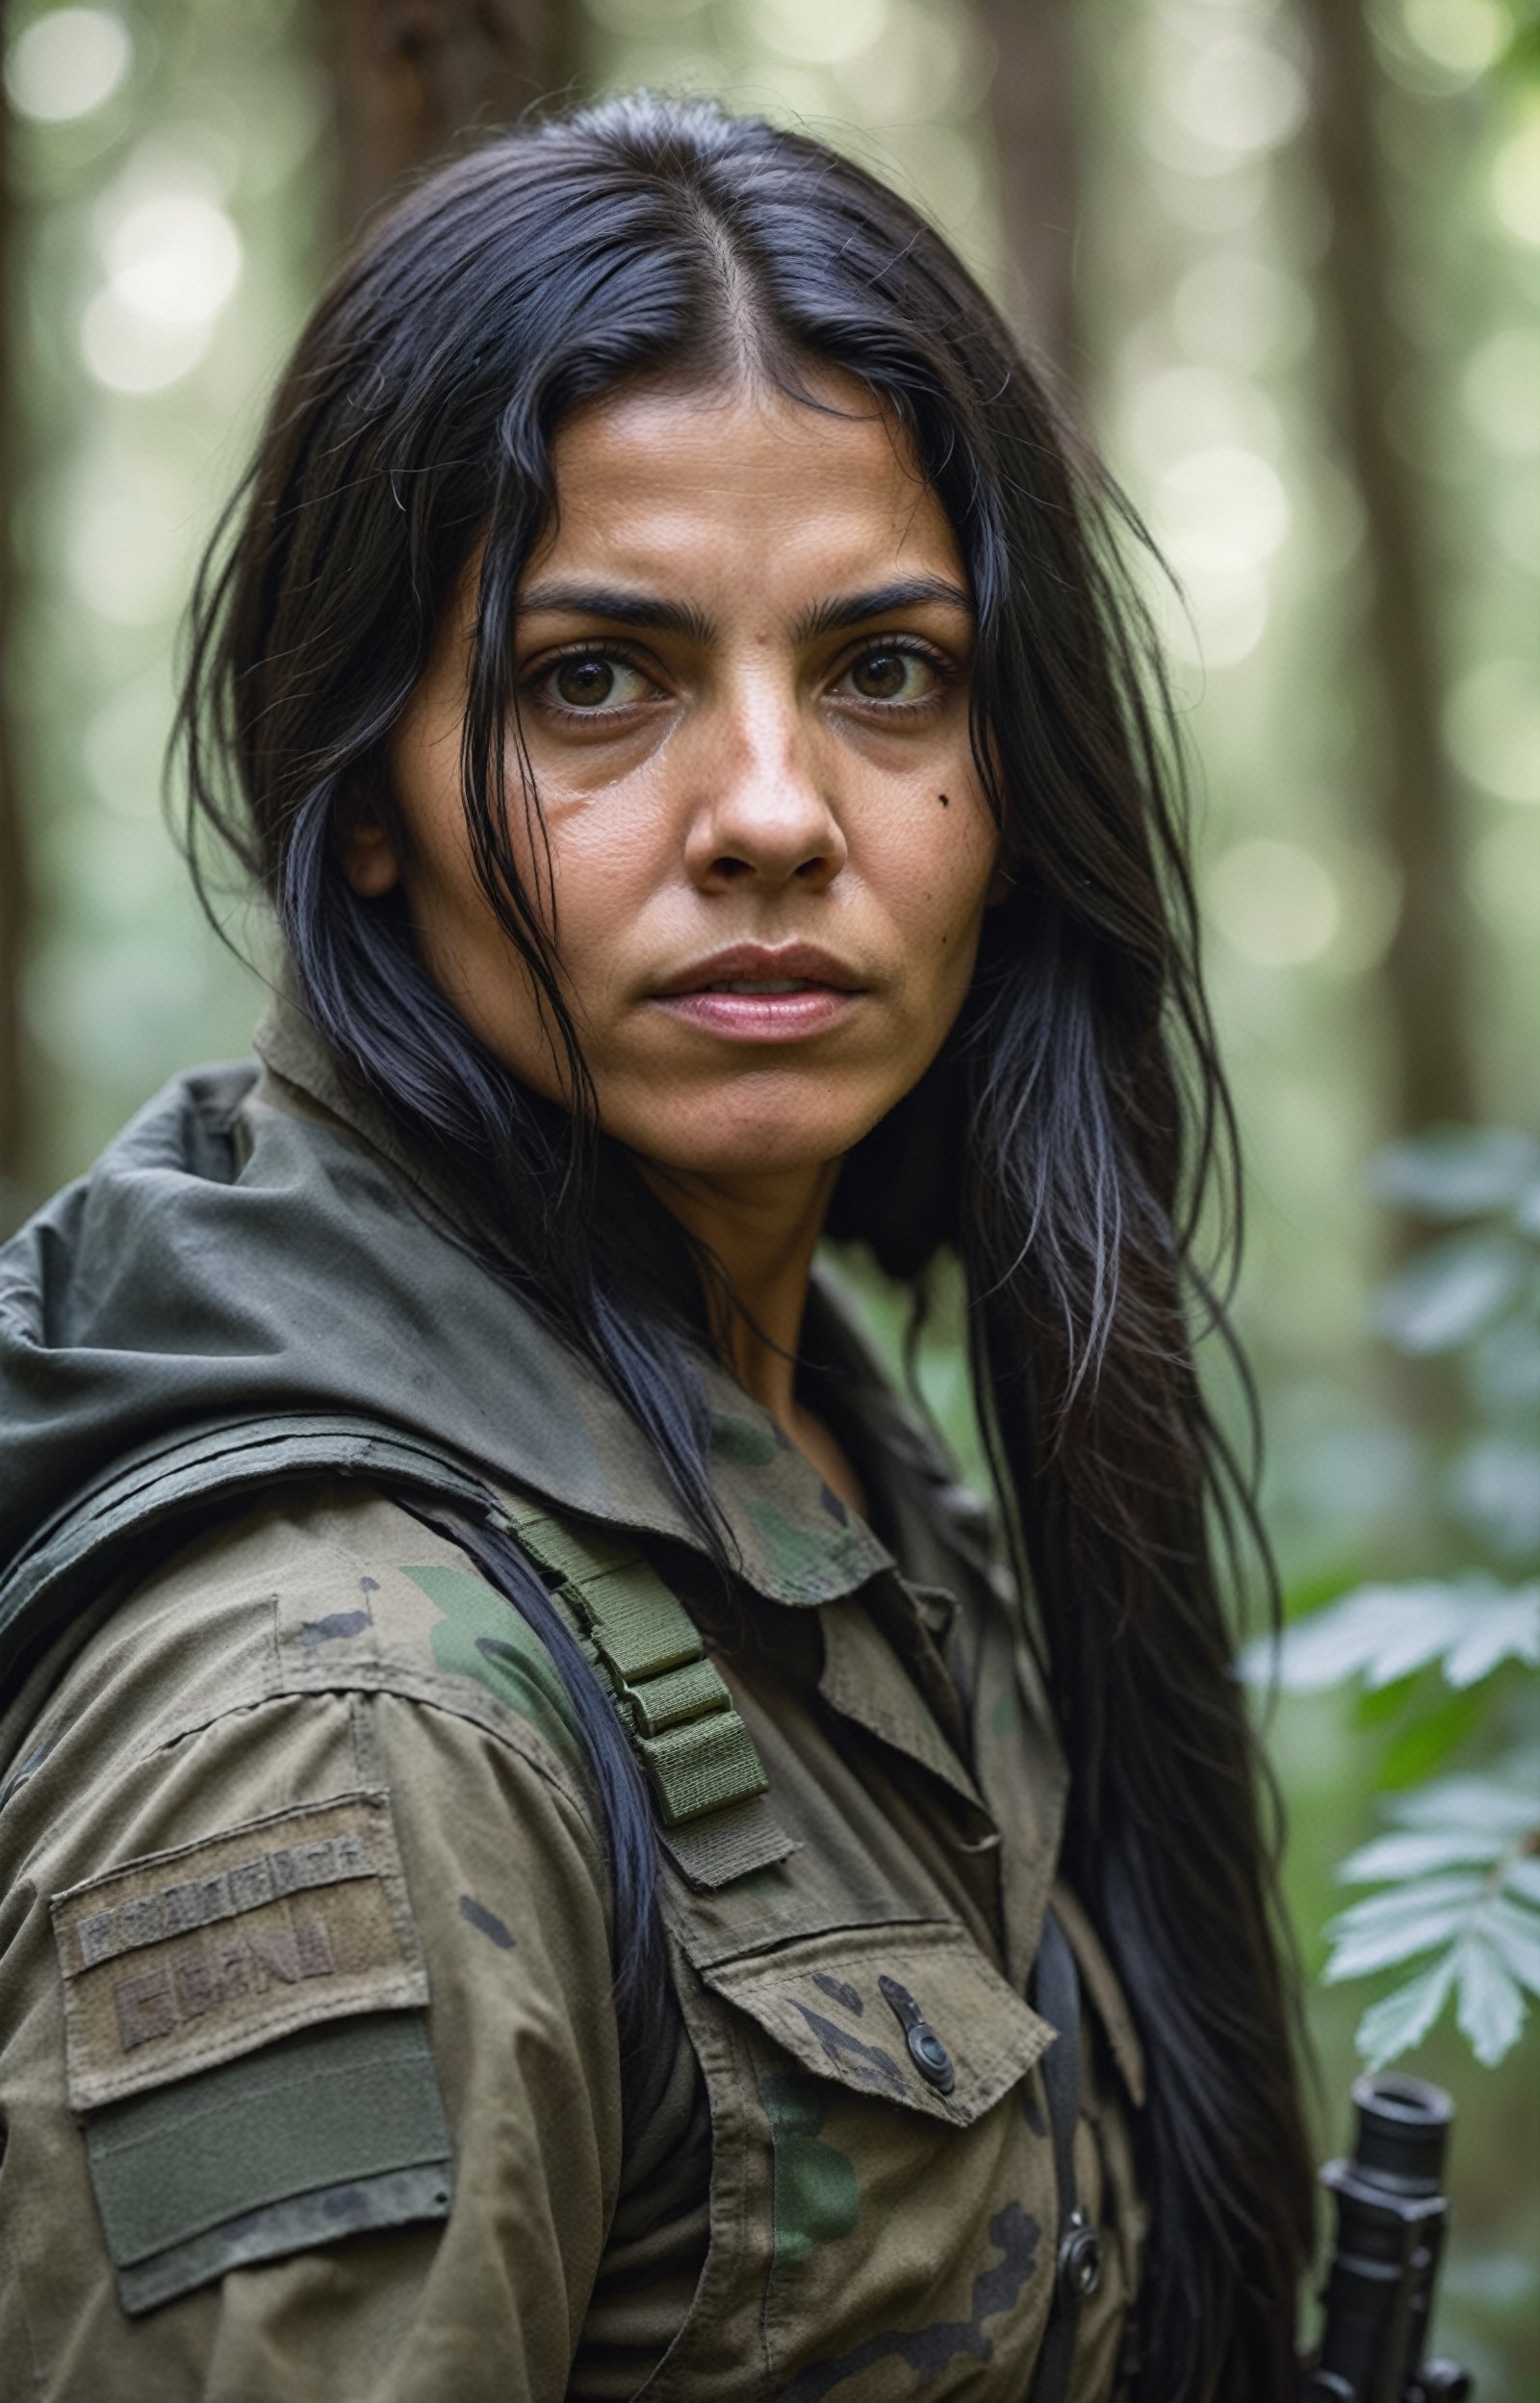 vintage closeup portrait photograph of a supernaturally beautiful Roma woman guerrilla fighter commando with long thick straight glossy black hair, she is wearing tattered camouflage commando gear in an old-growth forest setting, superb bokeh 